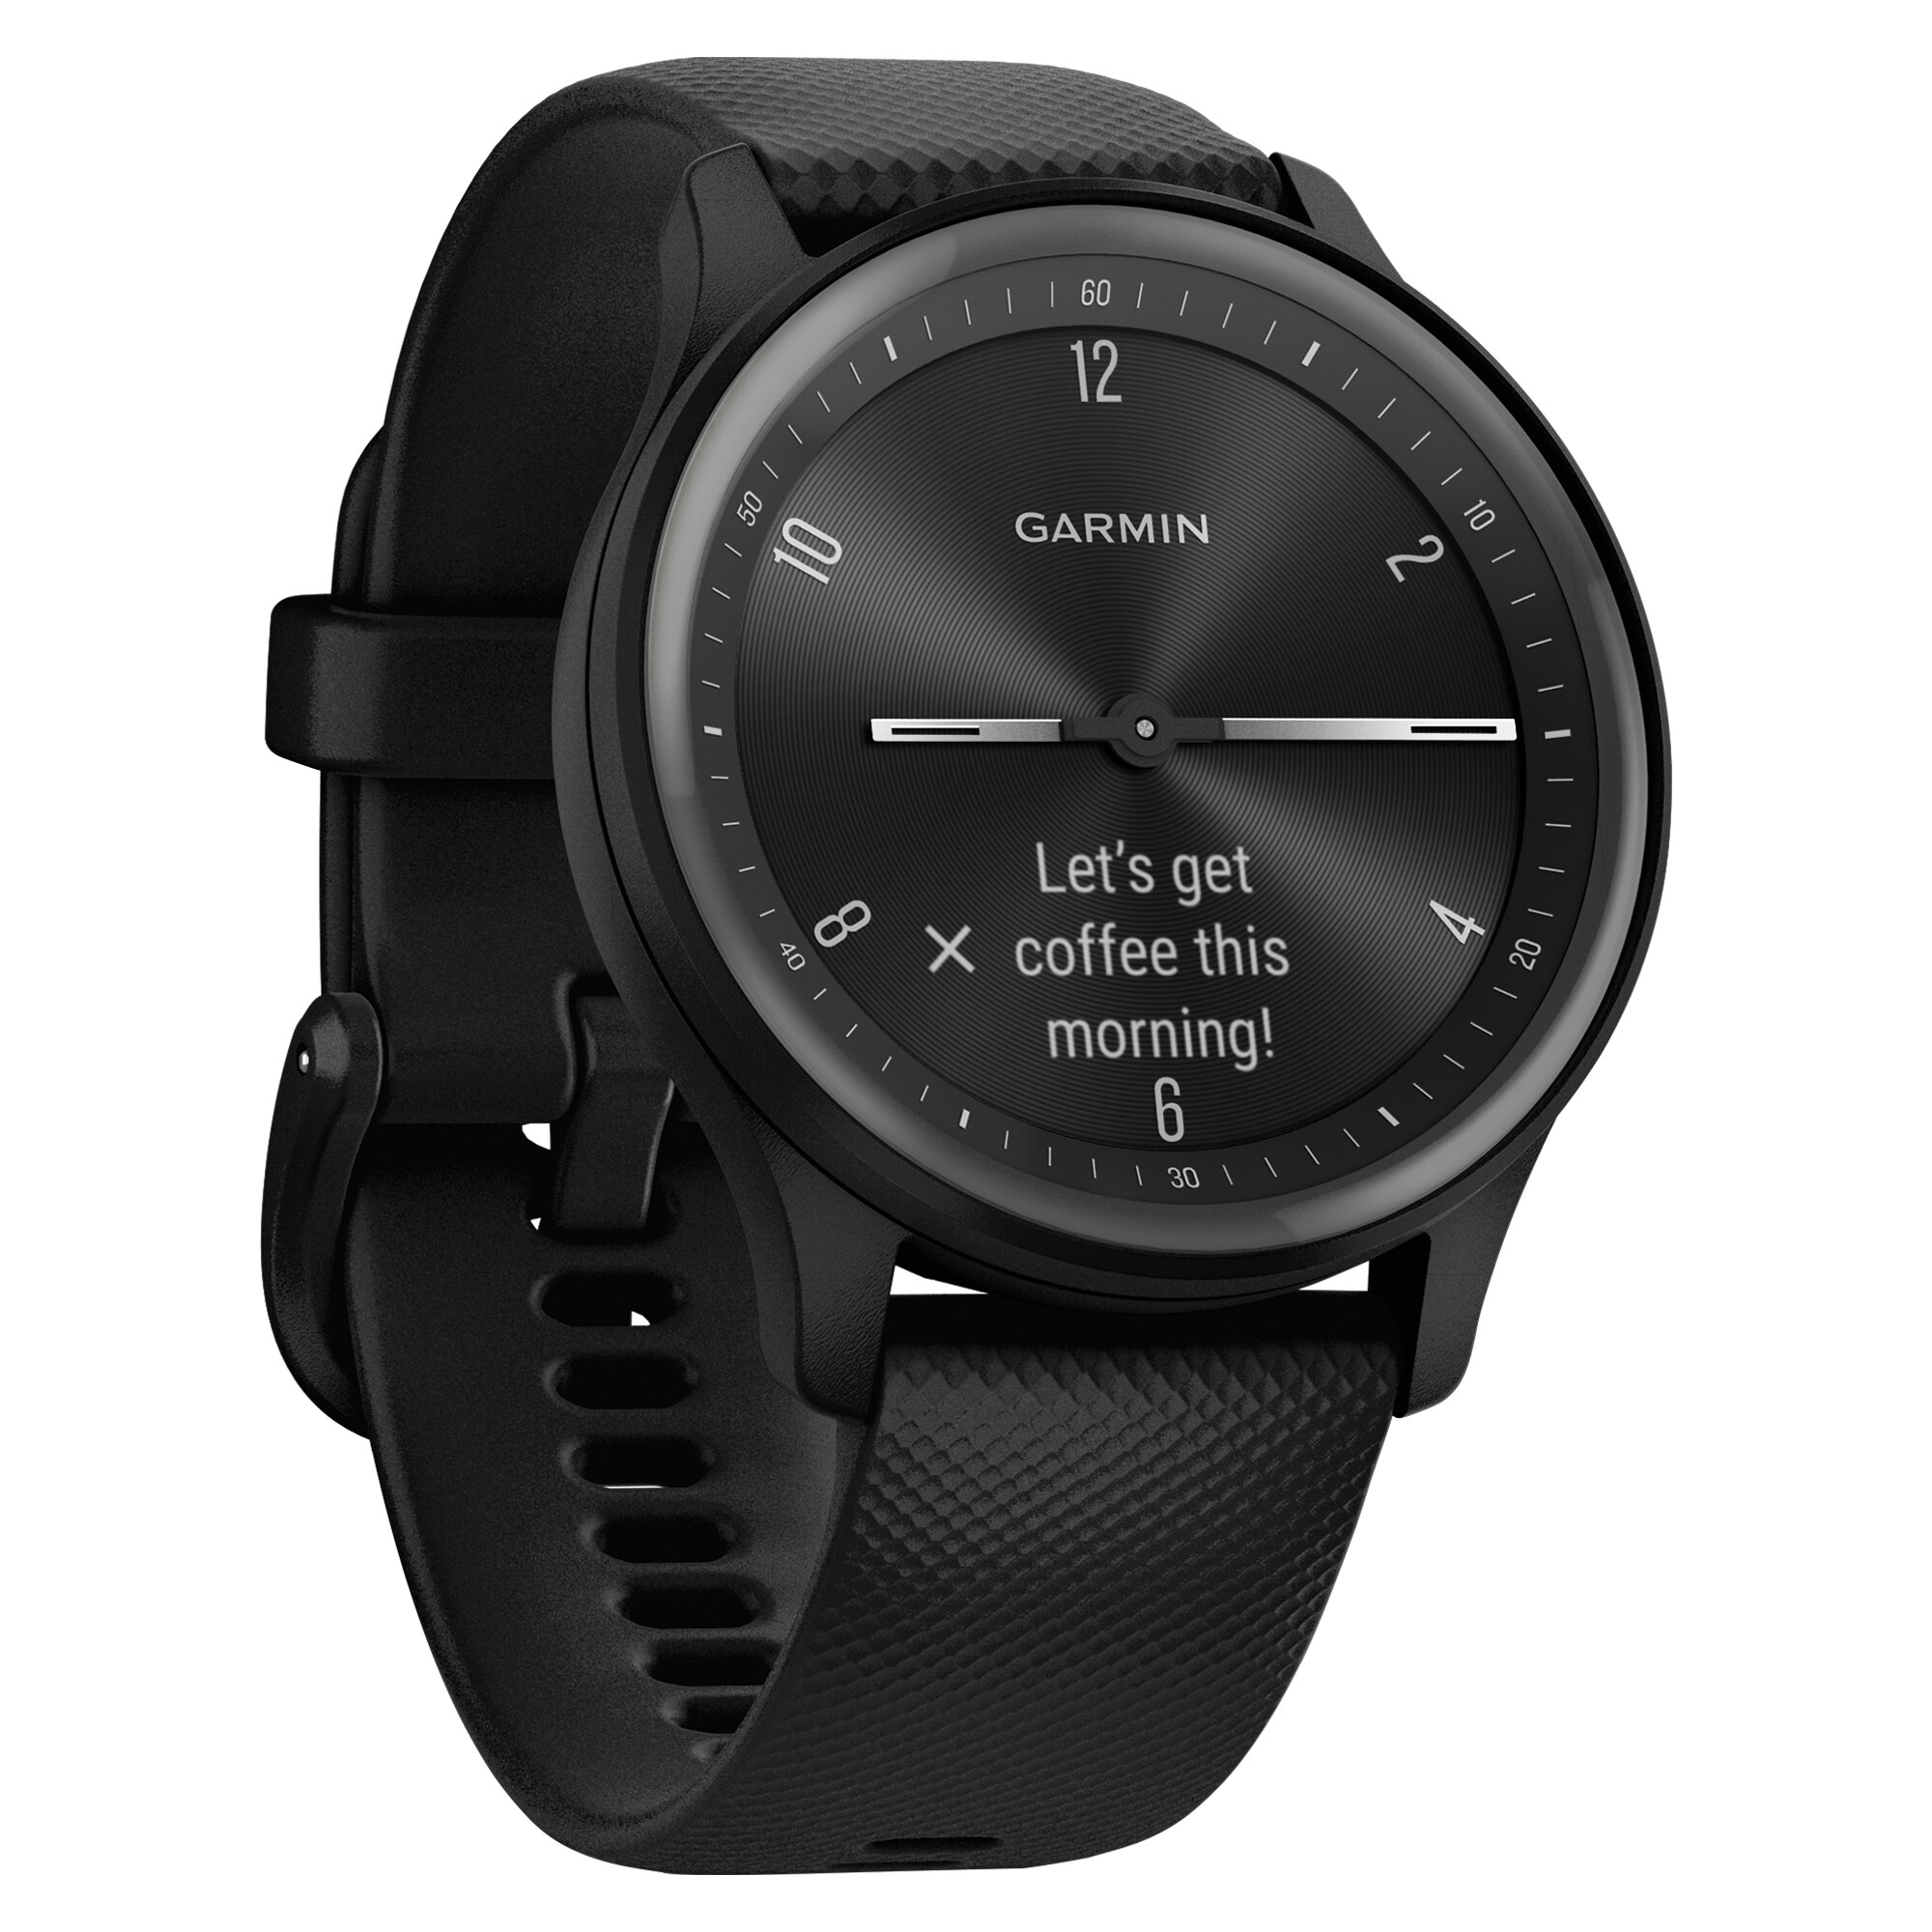 Case, with department Silicone Trackers Sport Slate vívomove at Accents) Smartwatch in Fitness Garmin (Black the Band